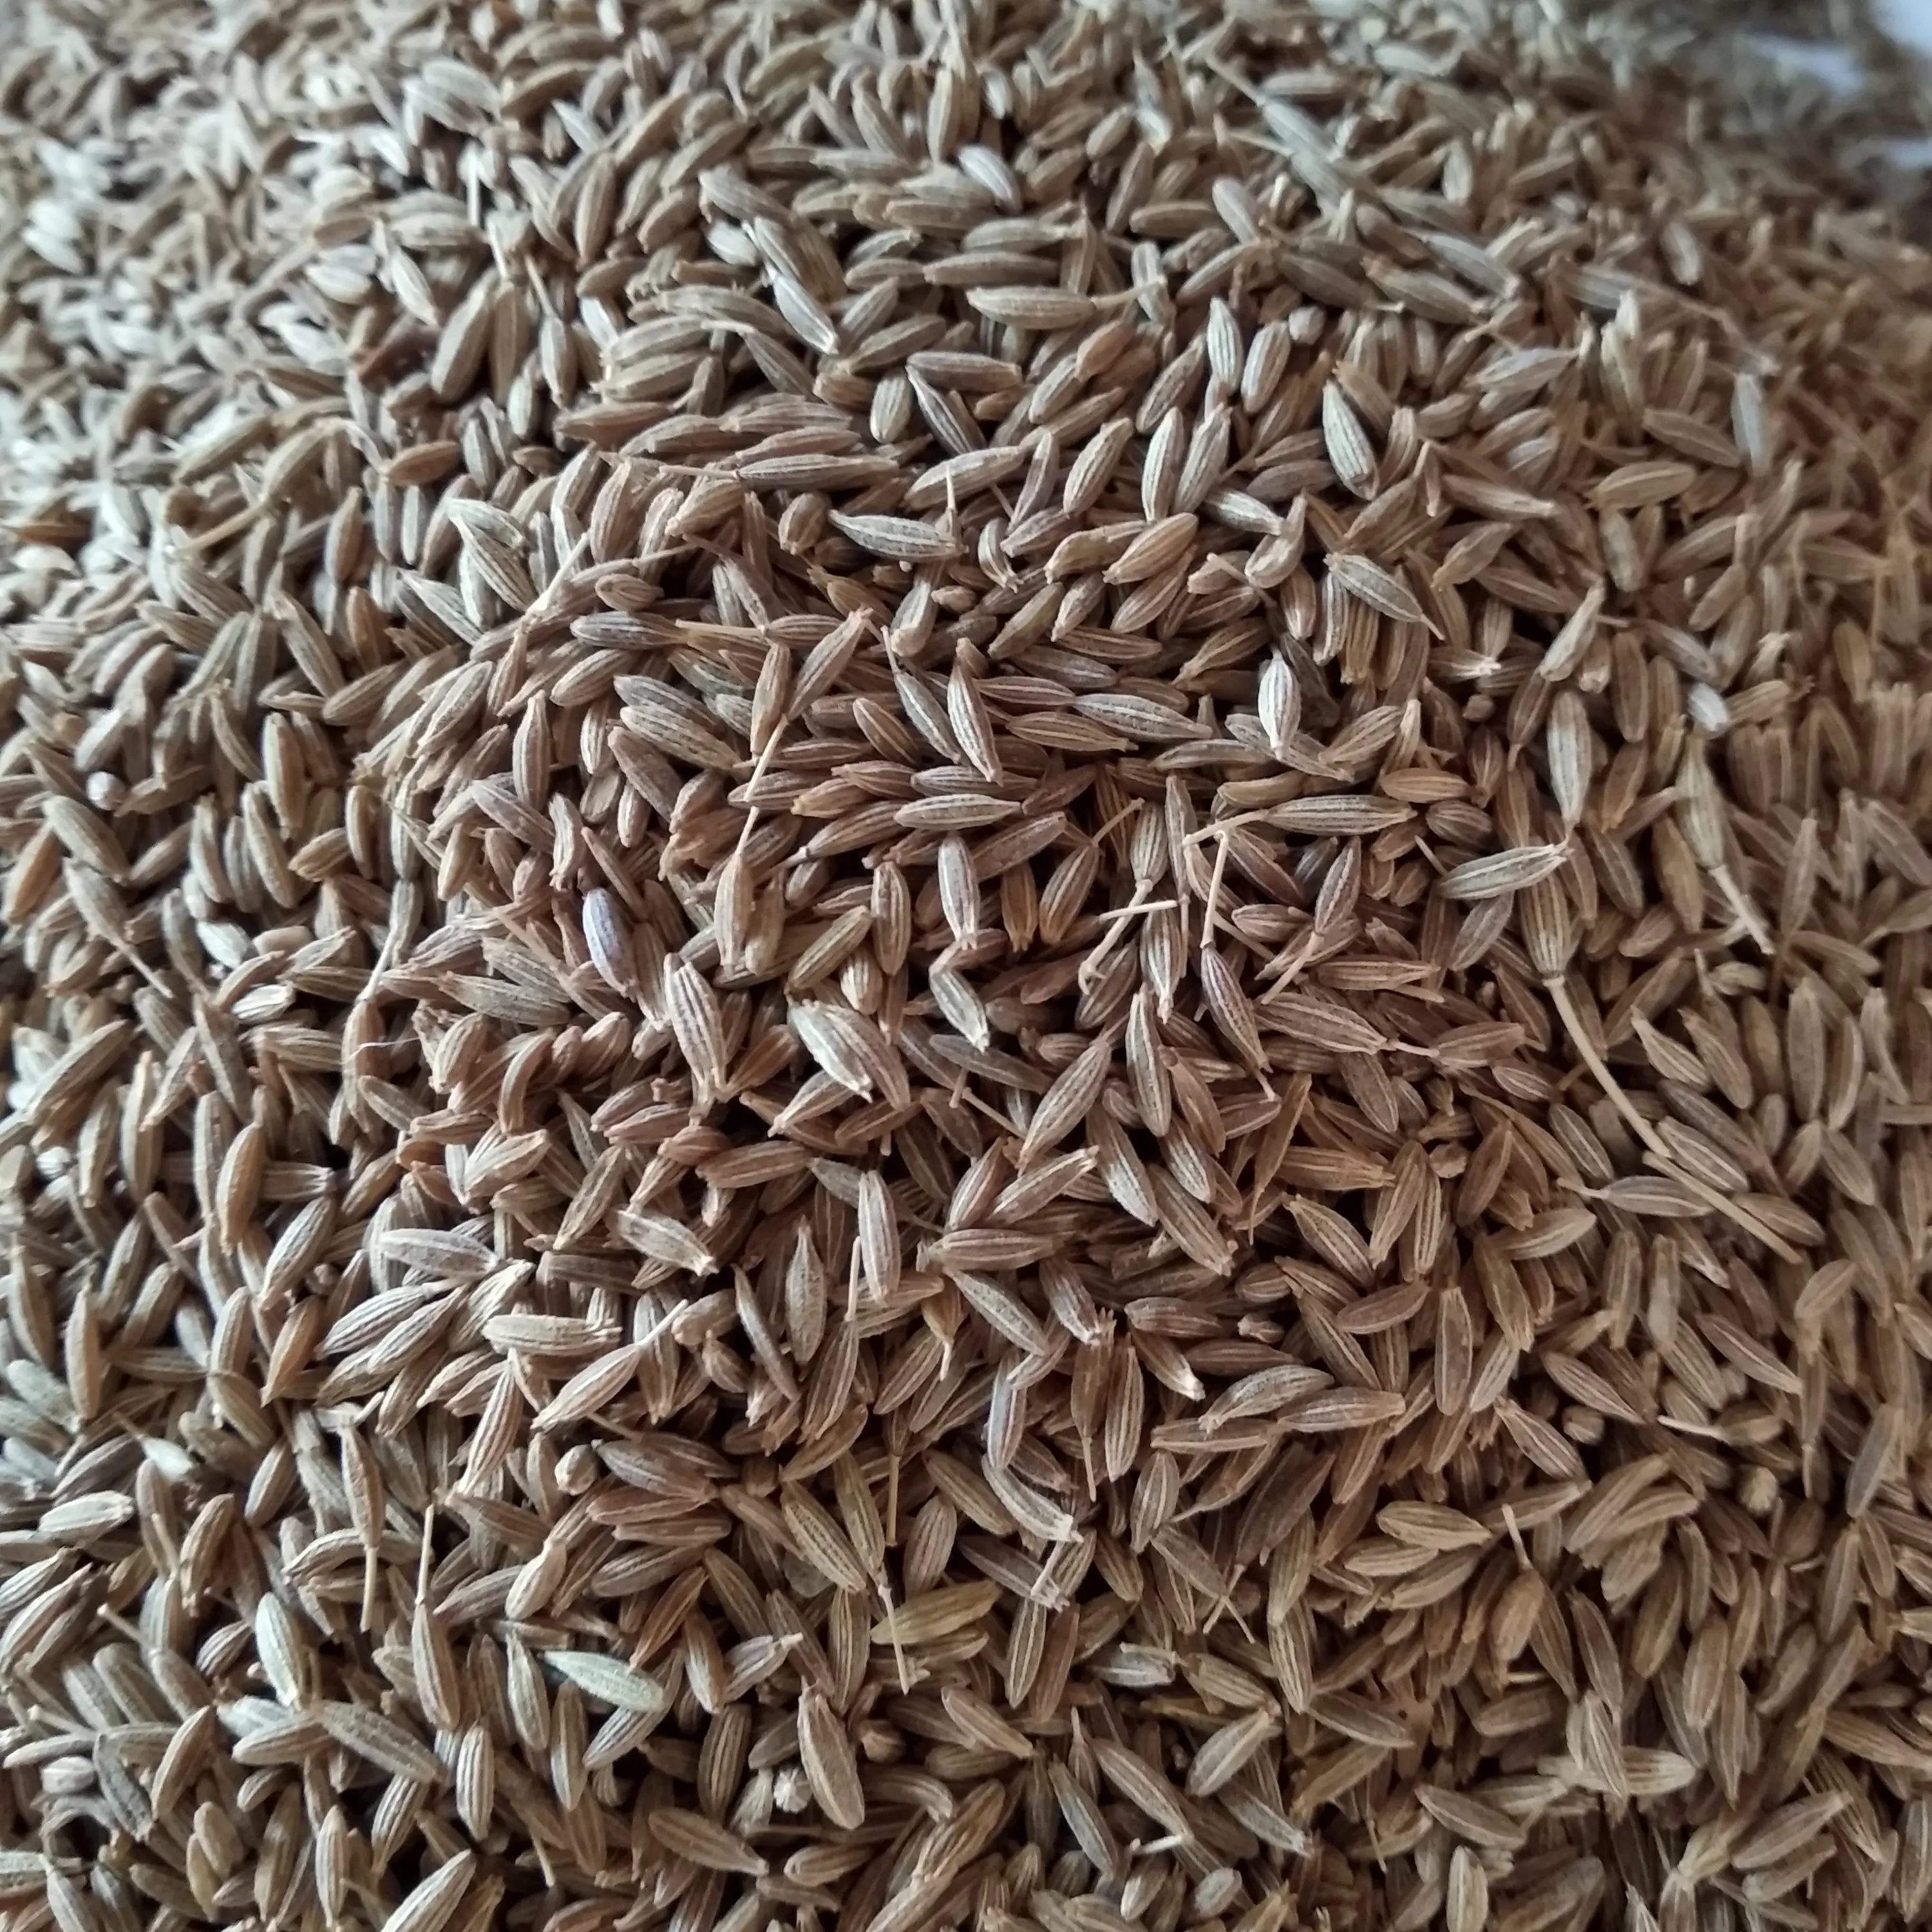 Cumin Seeds Buy Price For Cumin Seeds Cumin Seeds And Fennel Seeds In Tamil Black Cumin Seed Oil Product On Alibaba Com